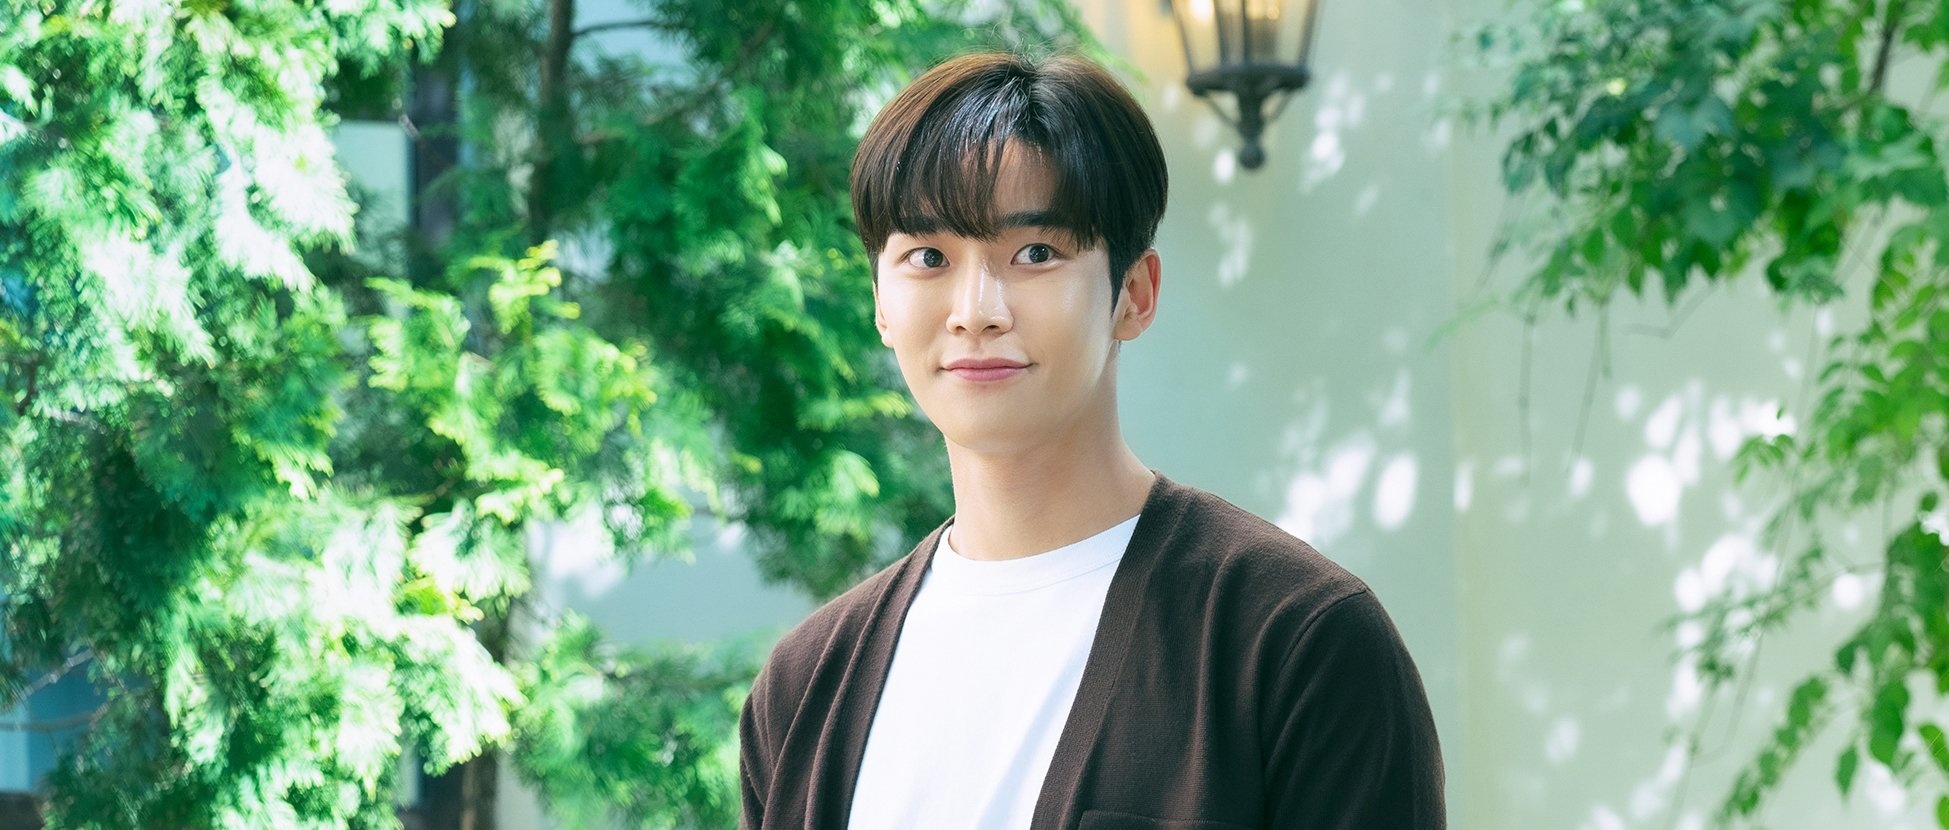  SF9 Rowoon Tries to Talk About Love and ‘She
Would Never Know’